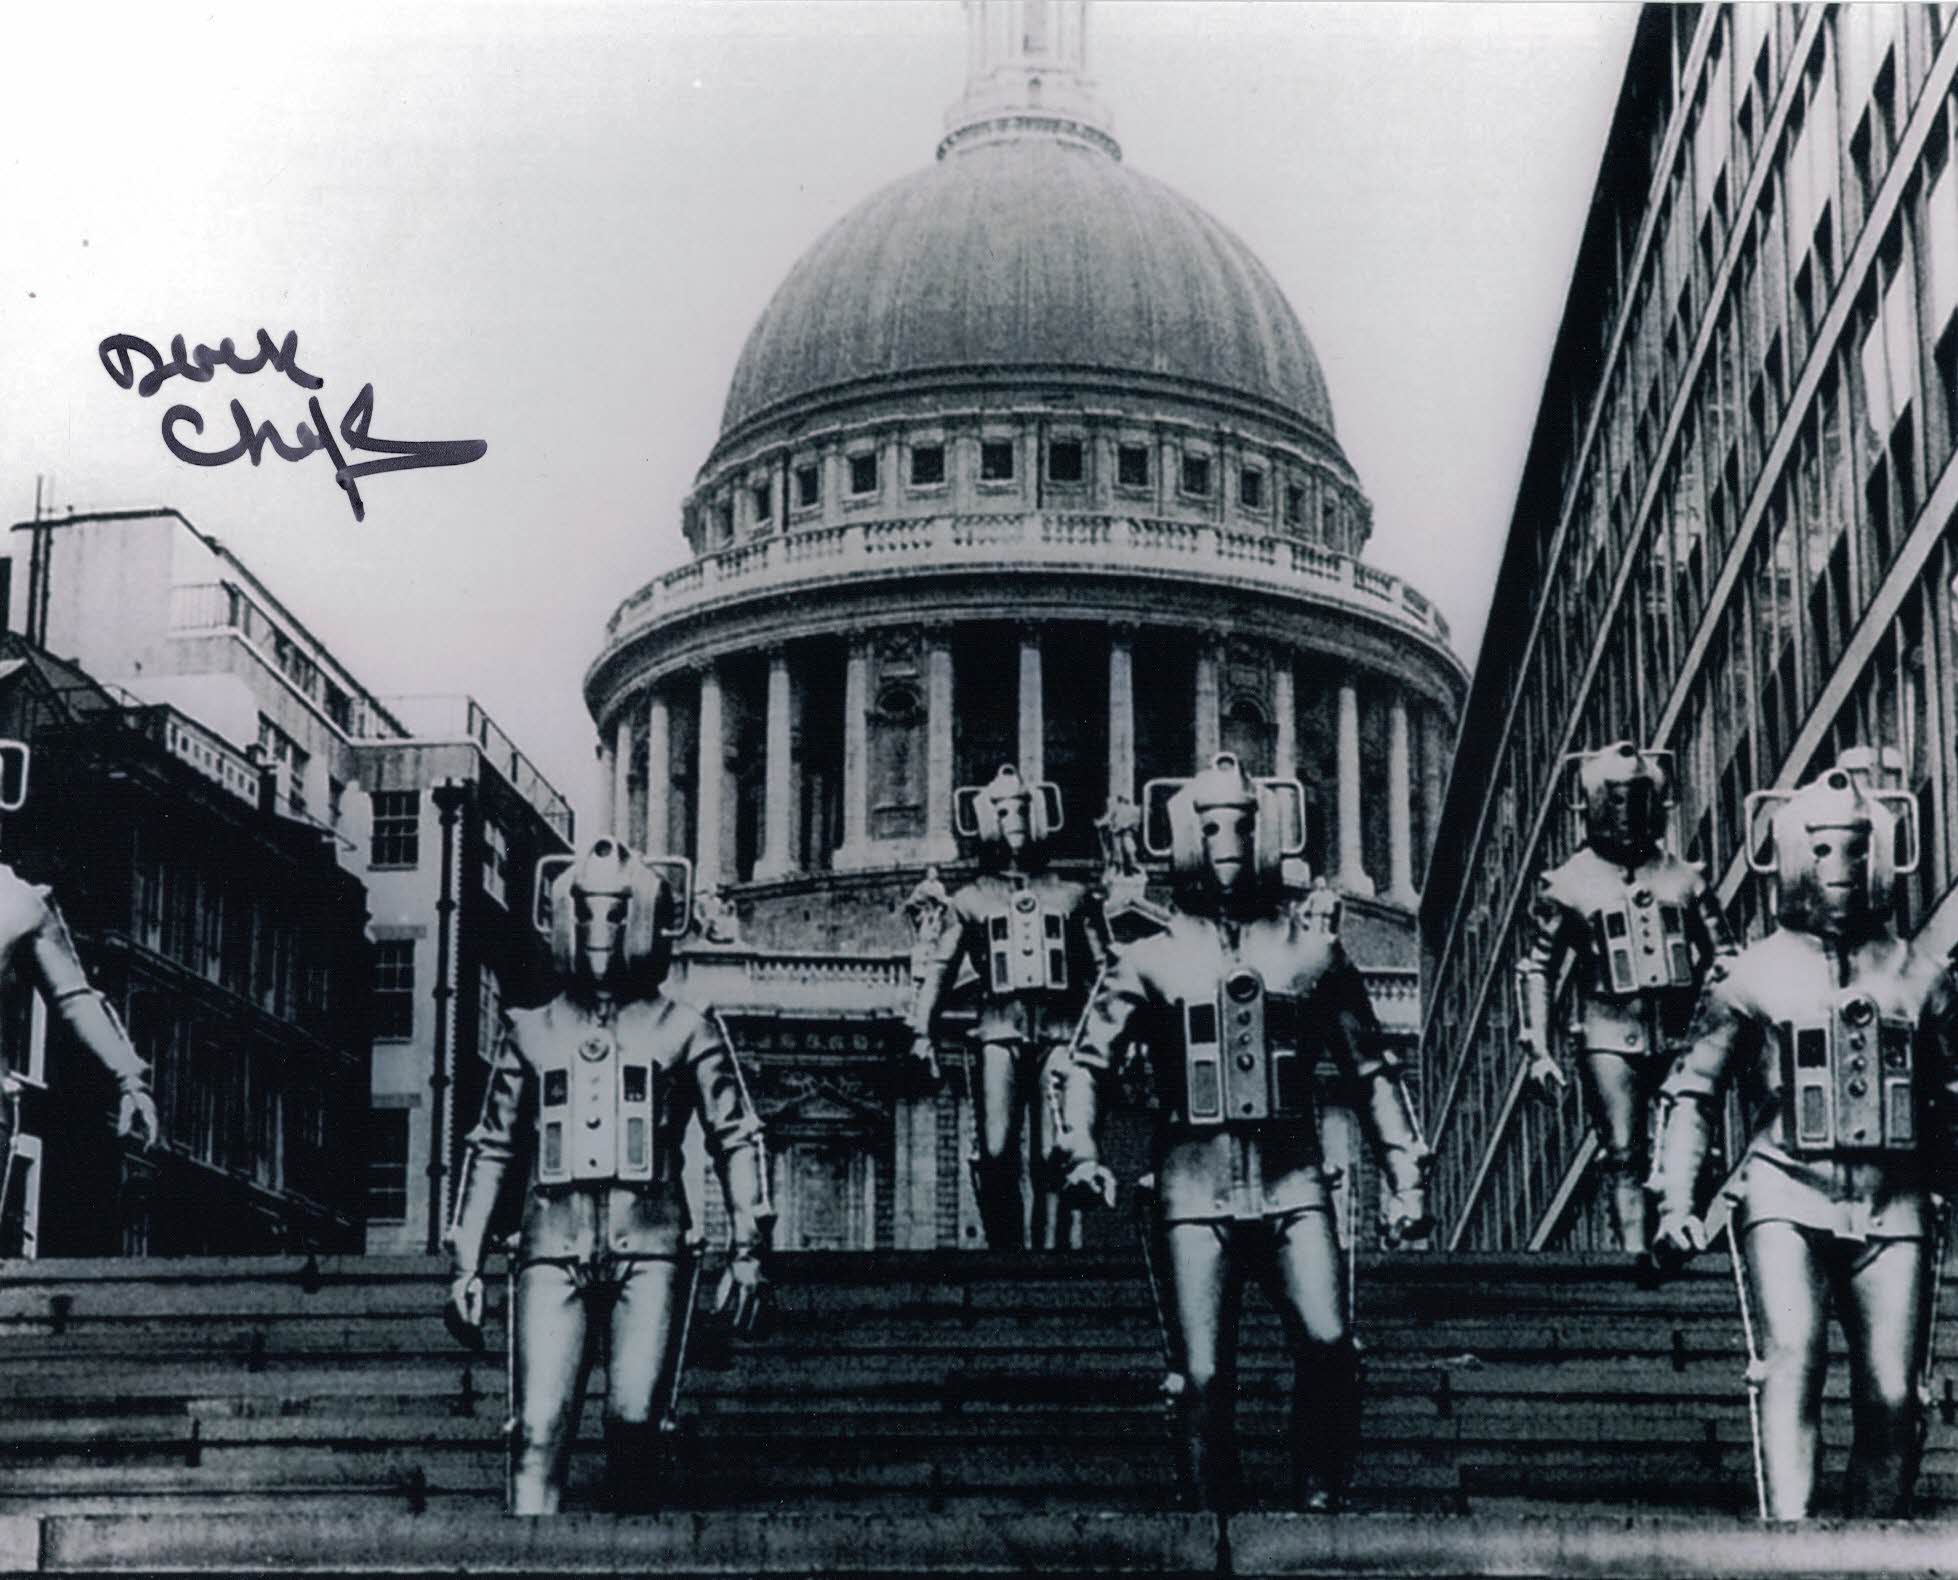 DEREK CHAFER -Cyberman  in Doctor Who - The Invasion- hand signed 10 x 8 photo